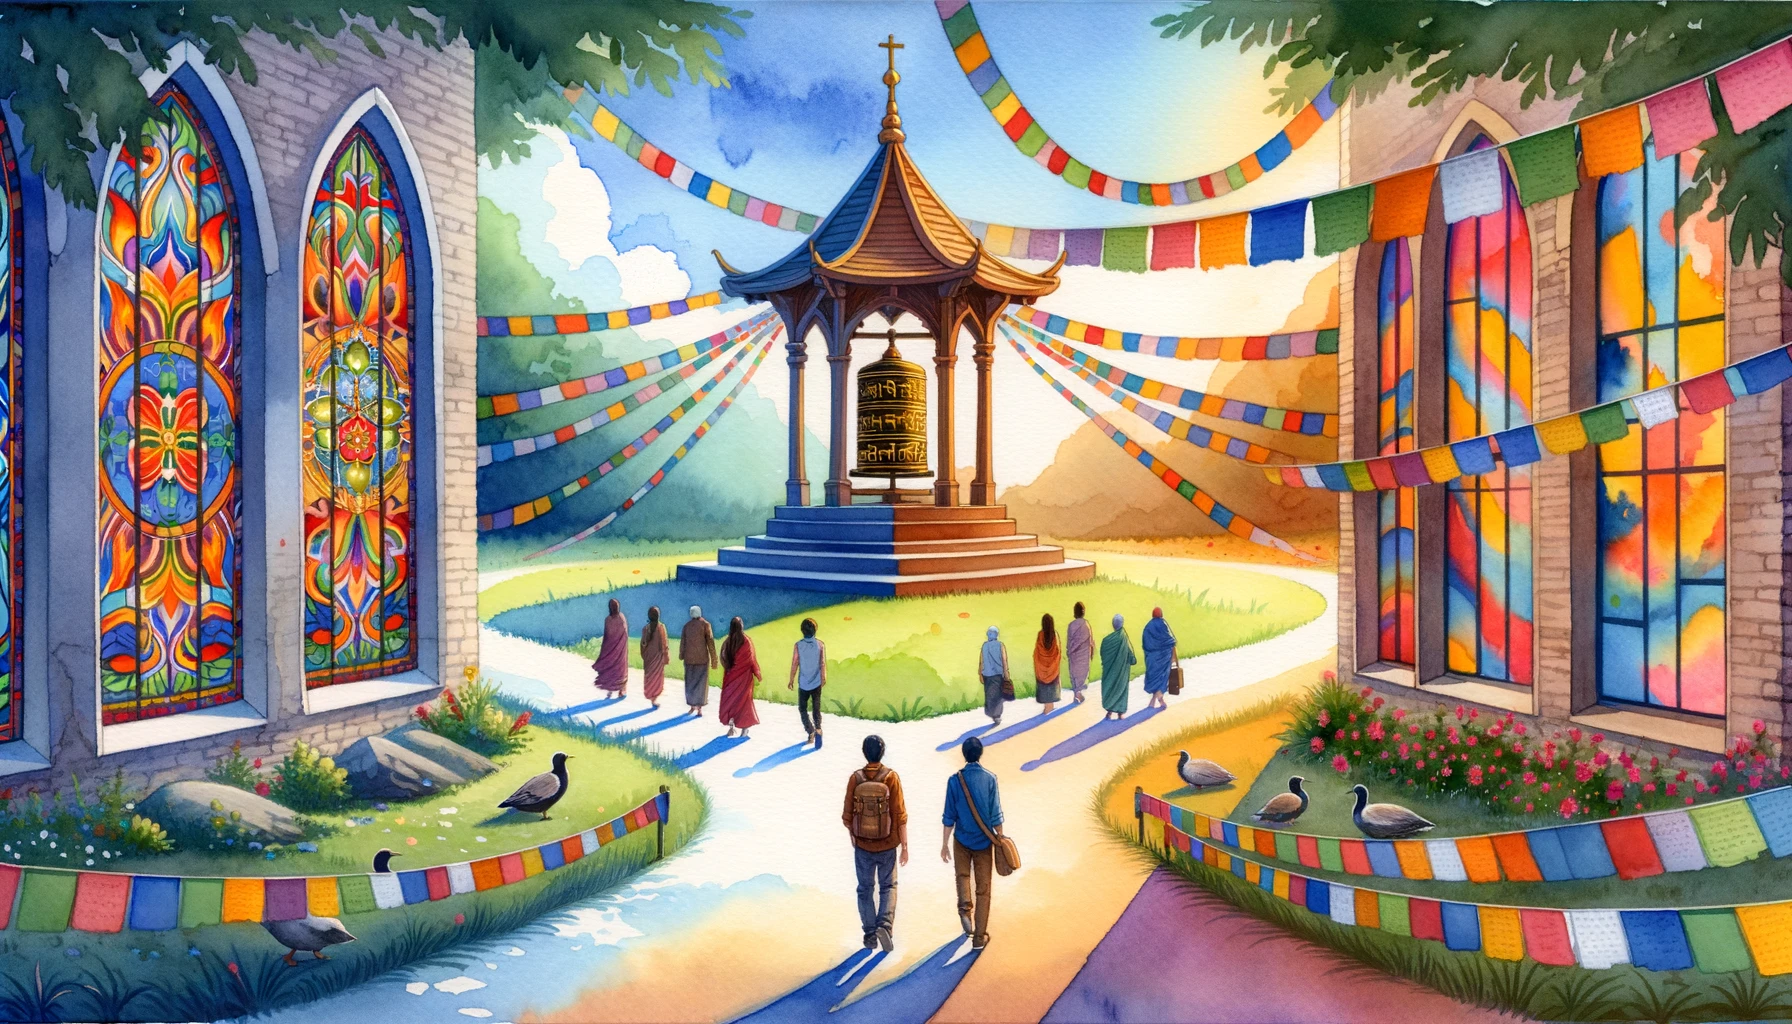 Converging paths showcase a stained-glass Christian church window on the left, casting colorful patterns, and a Buddhist prayer wheel on the right, surrounded by vibrant flags.